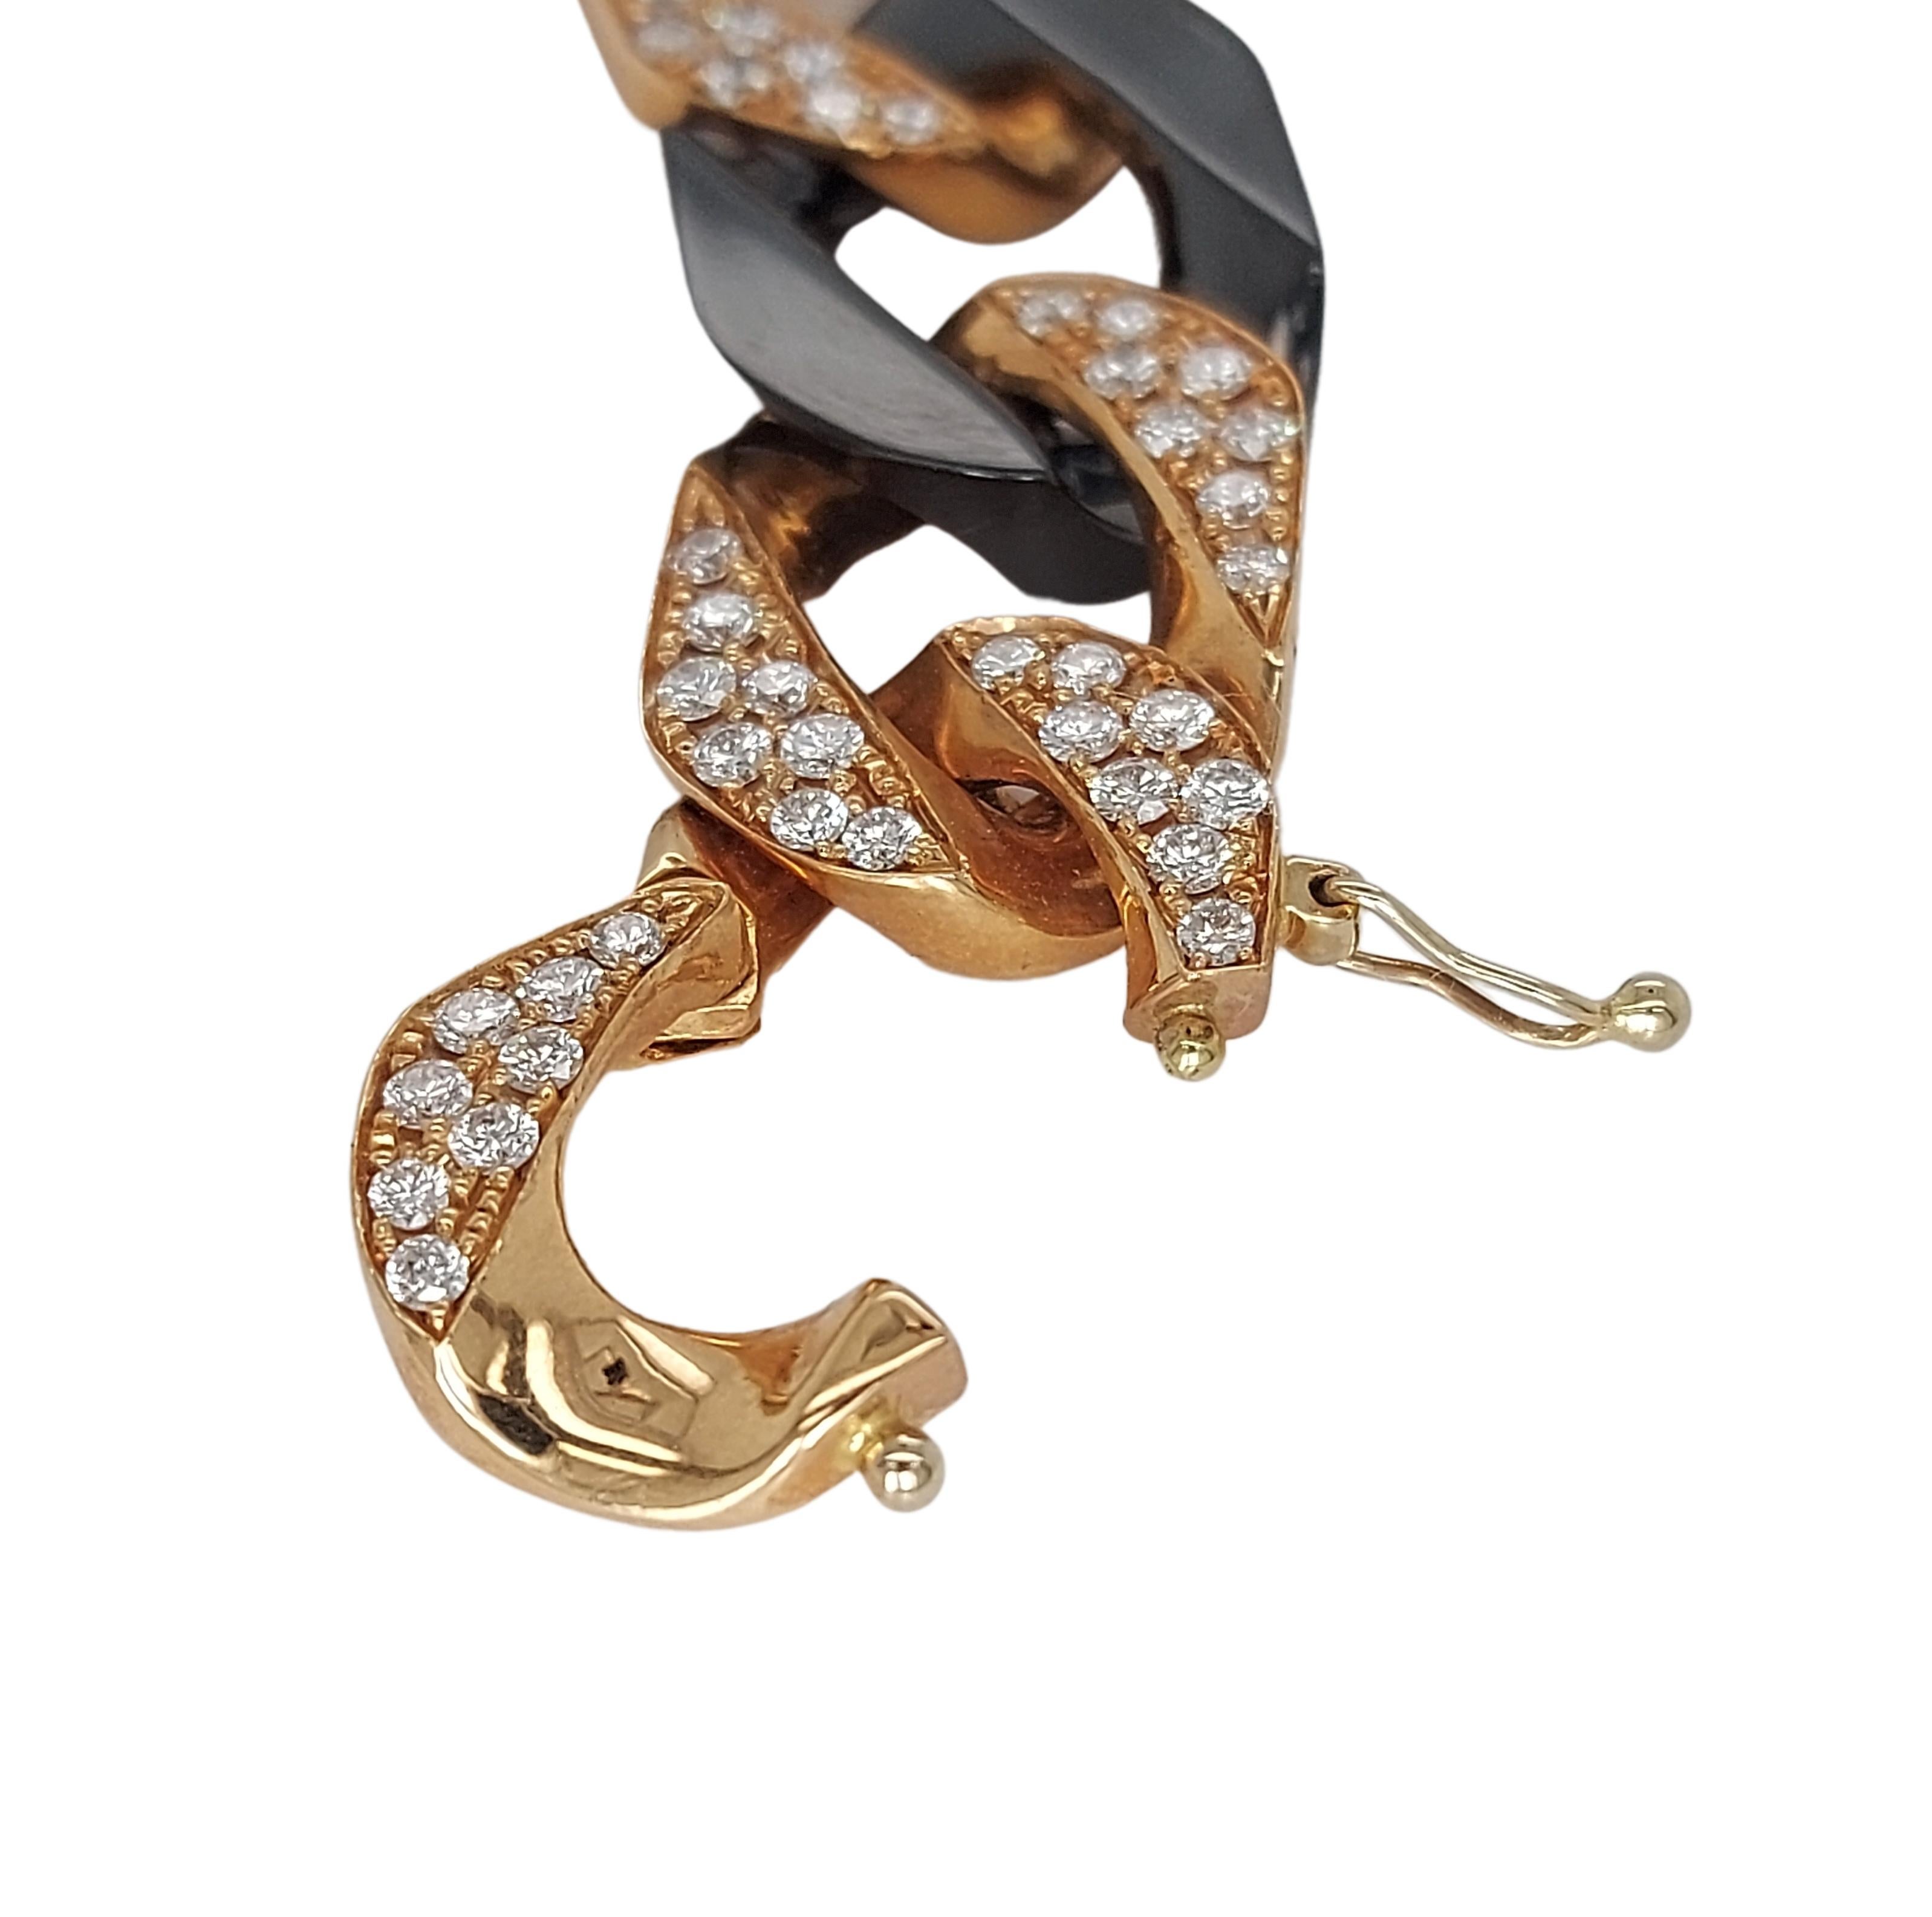 Women's or Men's 18kt Pink Gold Bracelet With Brilliant Cut Diamonds and Black Onyx For Sale